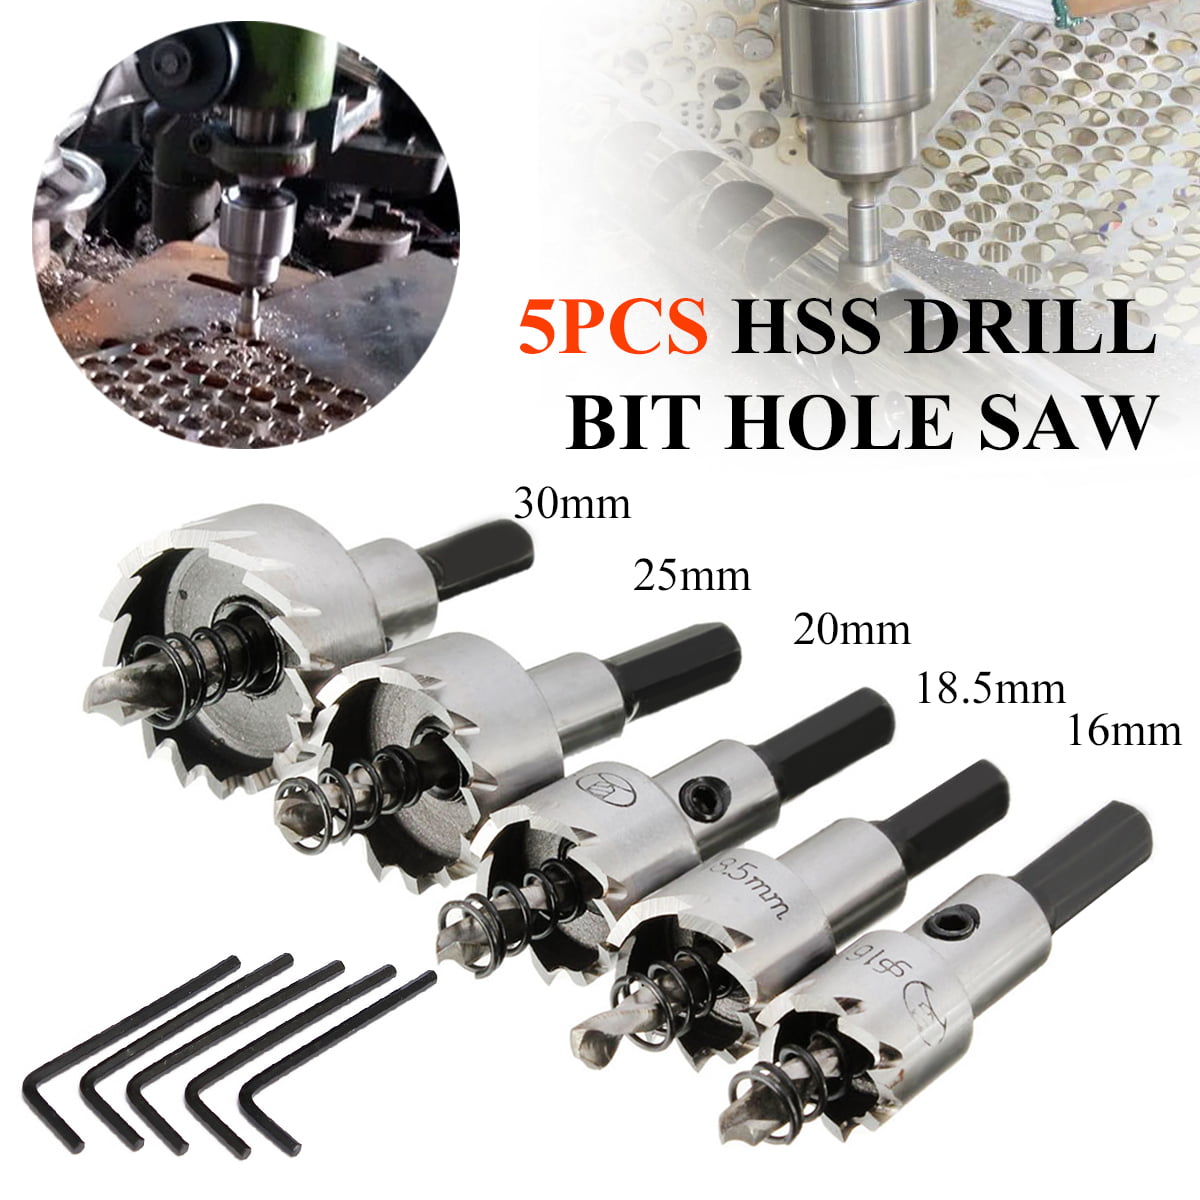 Drill Bit Hole Saw Stainless Steel Titanium Coated Metal Alloy Cutter 63mm